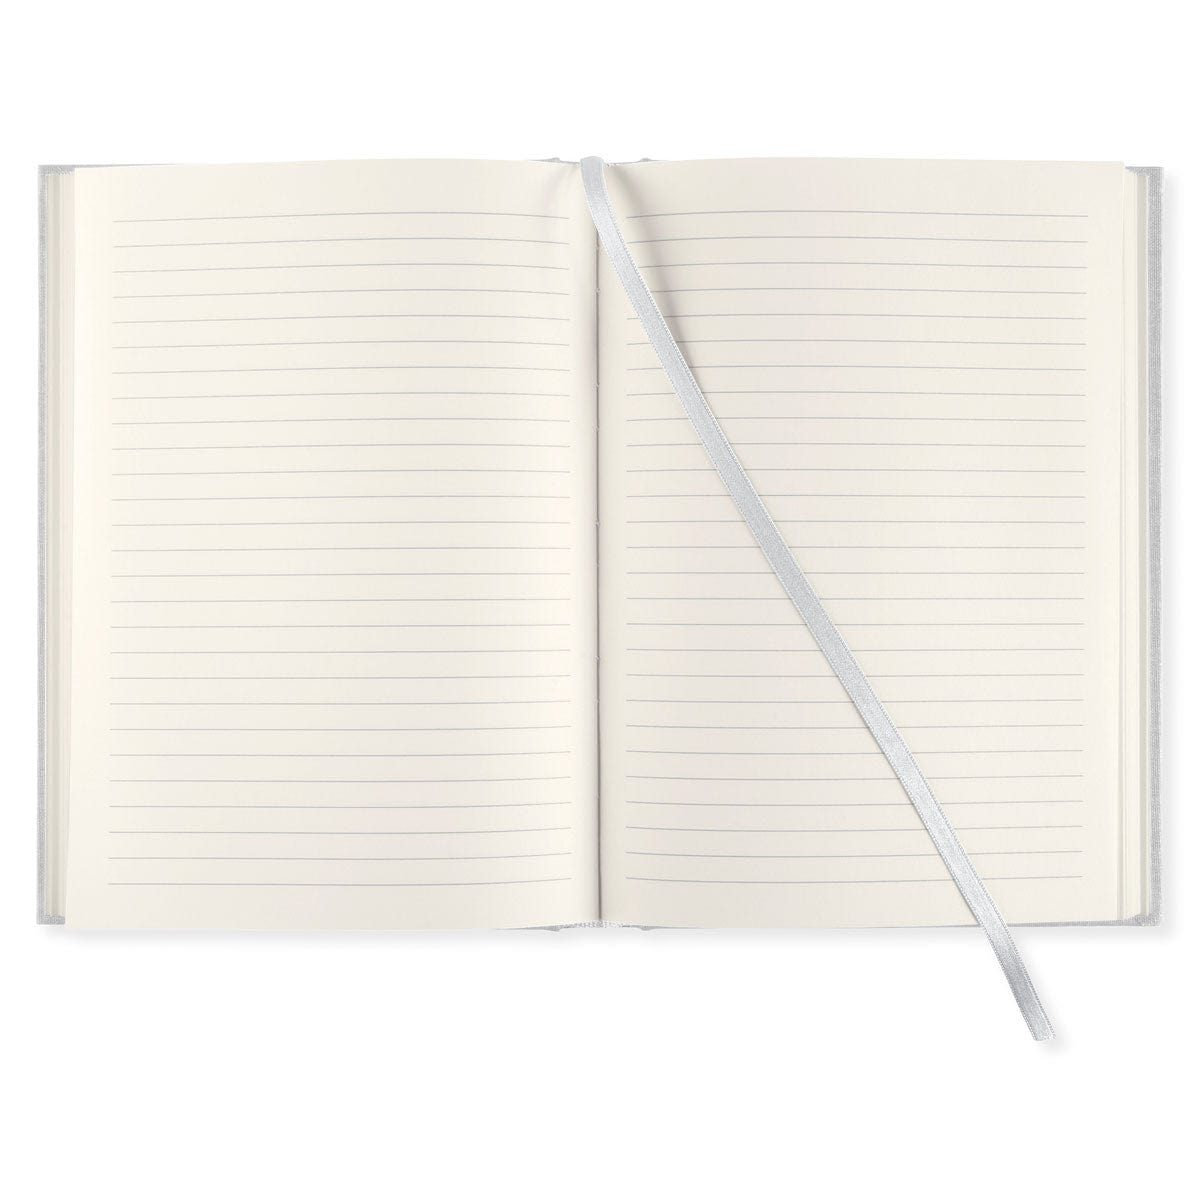 PaperStyle Paperstyle NOTEBOOK A5 128p. Ruled Red Twist